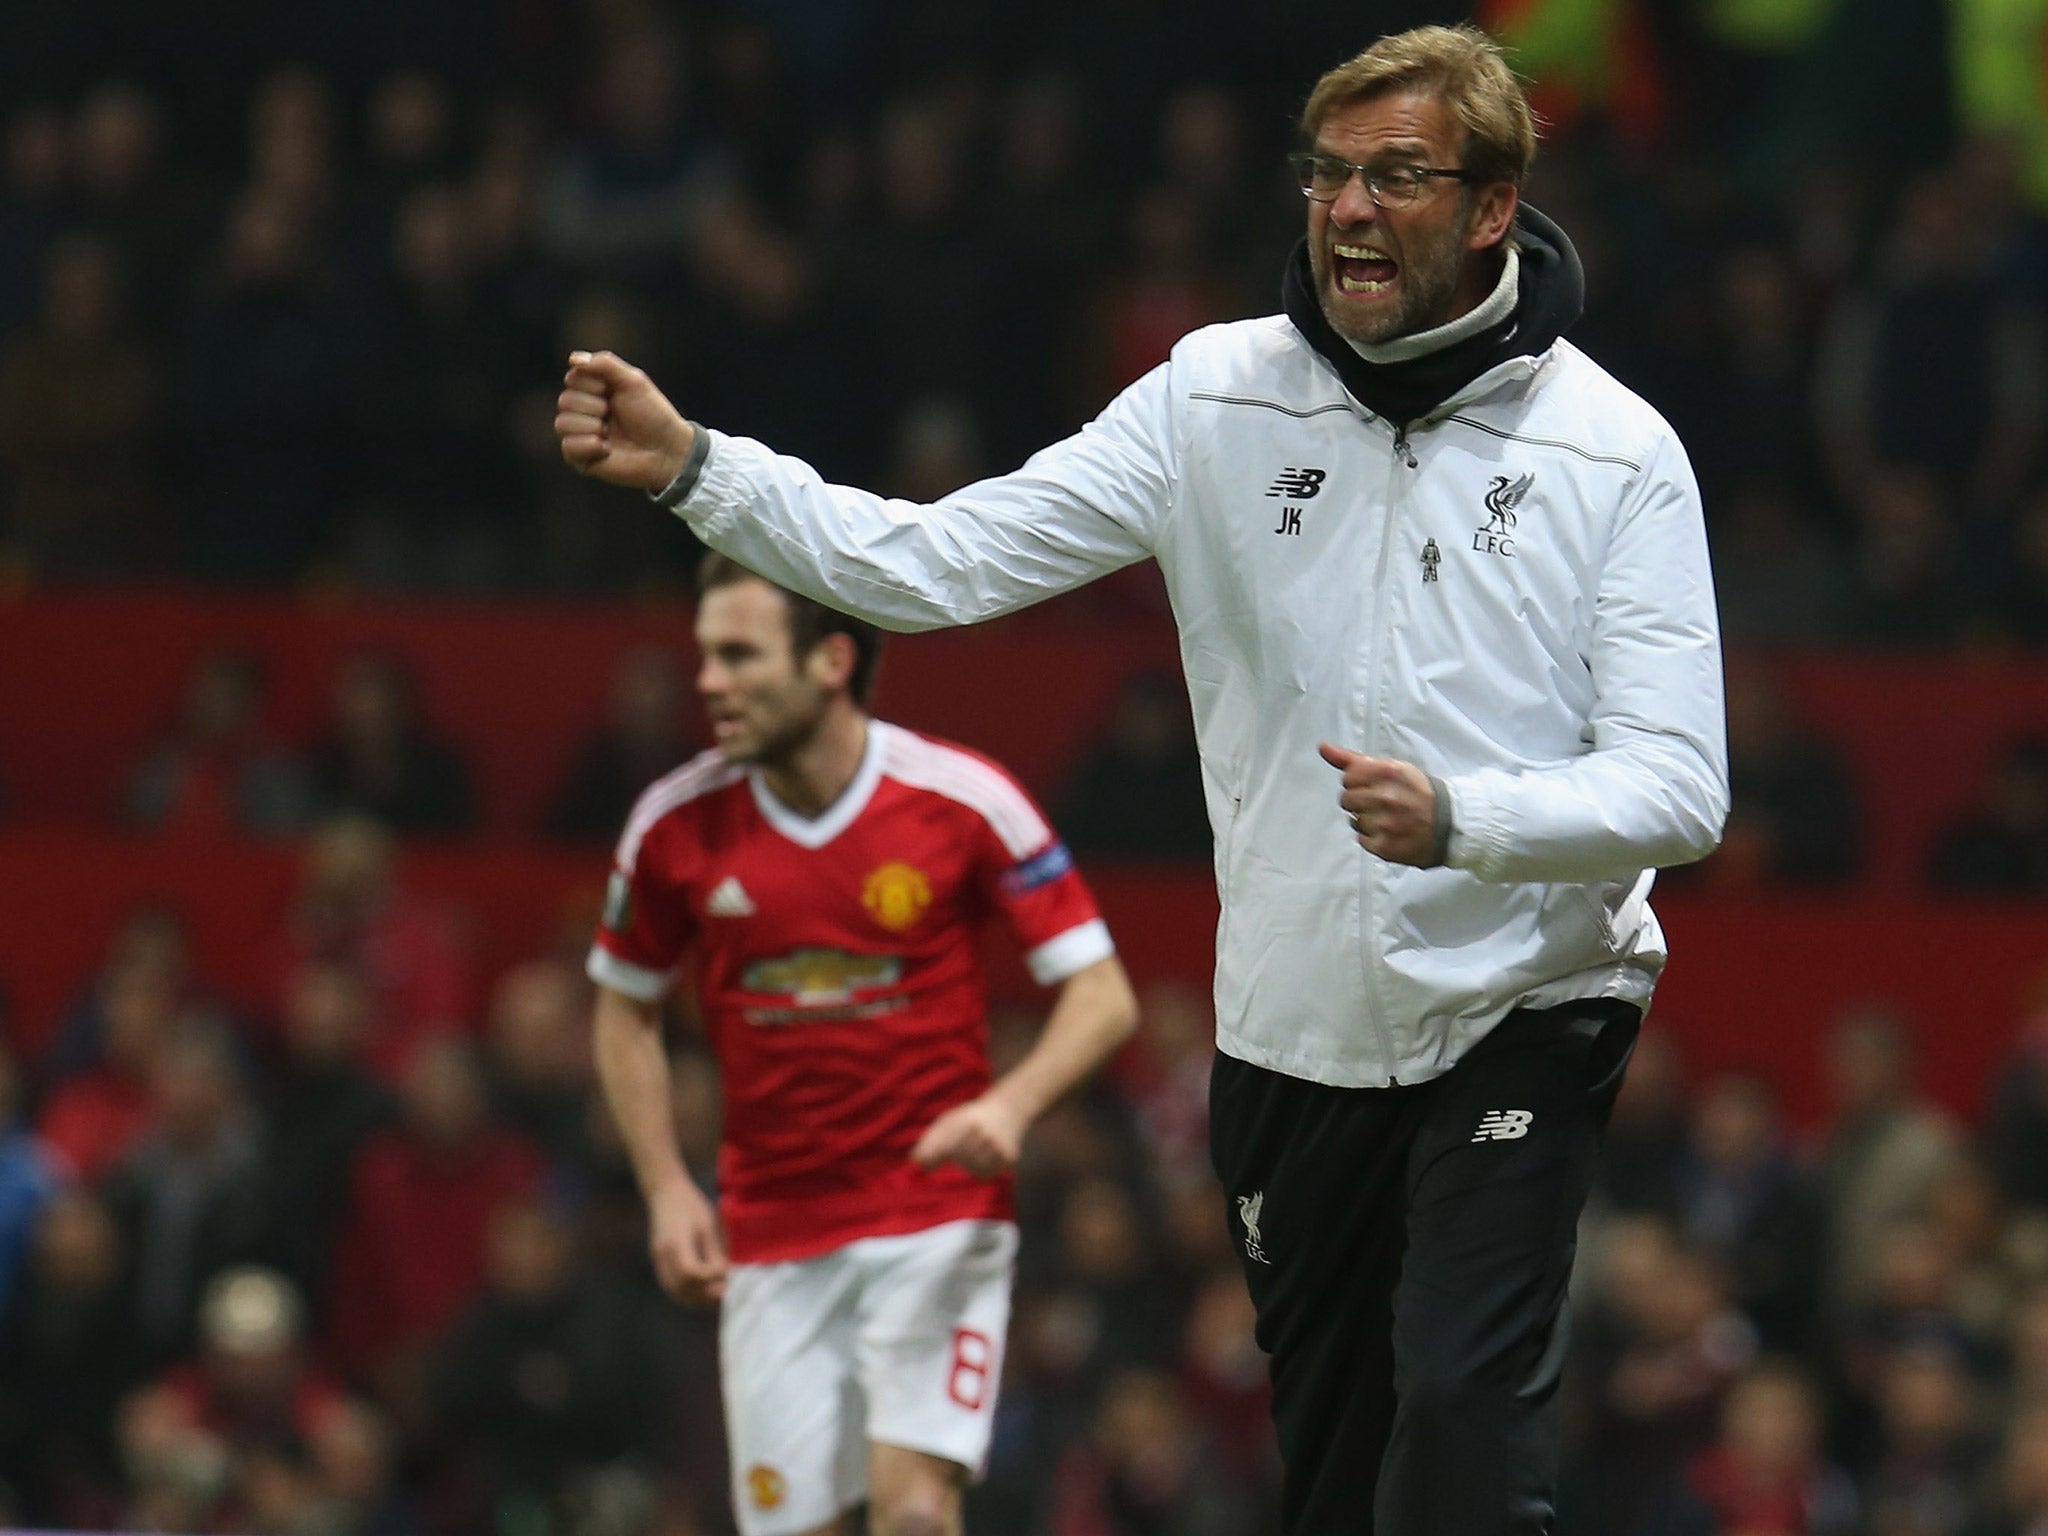 Jurgen Klopp reacts during Liverpool's 1-1 draw with Manchester United